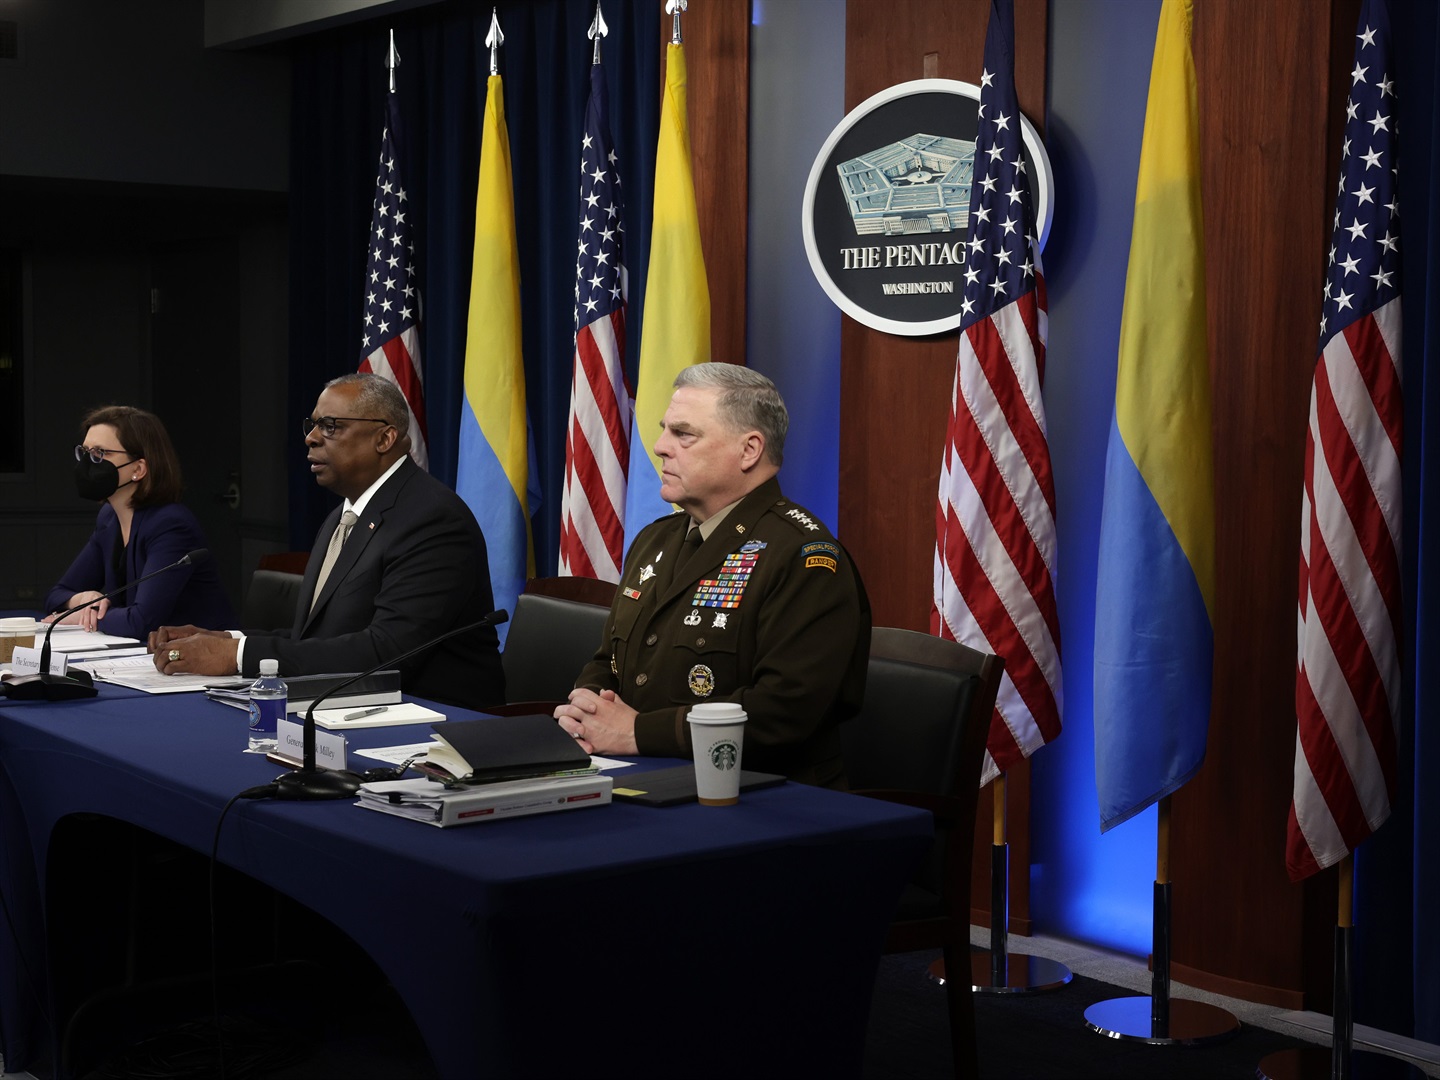 US Secretary of Defense Lloyd Austin (2nd L) gives opening remarks as Chairman of the Joint Chiefs of Staff General Mark Milley (R) and Deputy Assistant Secretary of Defense for Russia, Ukraine, Eurasia Laura Cooper (L) listen during a virtual meeting of the Ukraine Defense Contact Group at the Pentagon May 23, 2022 in Arlington, Virginia. Photo by Alex Wong/Getty Images